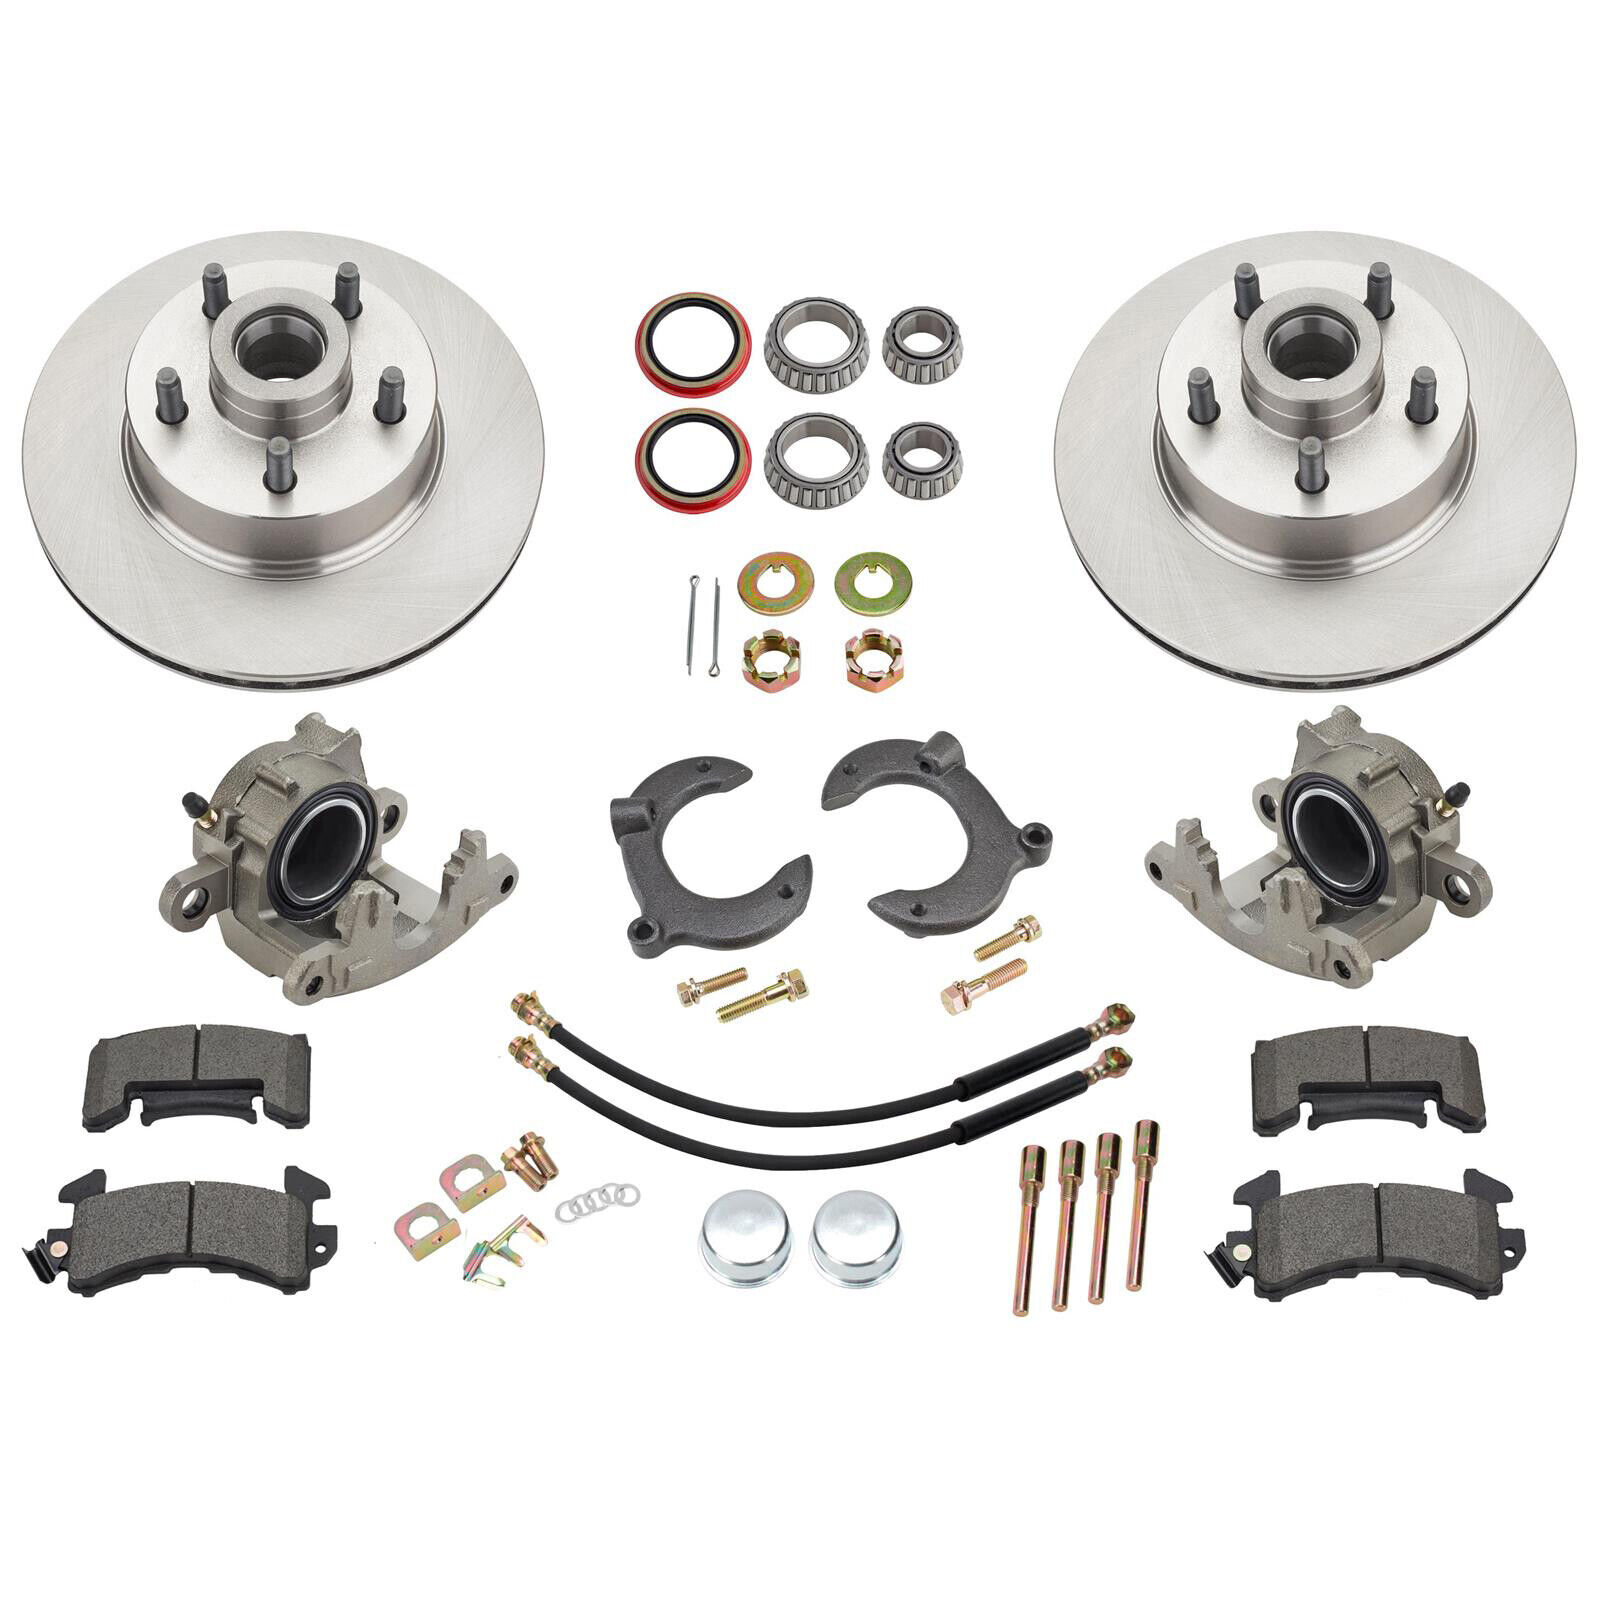 Complete 11 Inch Brake Kit, Fits Ford 5 x 4-1/2 Bolt Pattern, Fits Mustang II